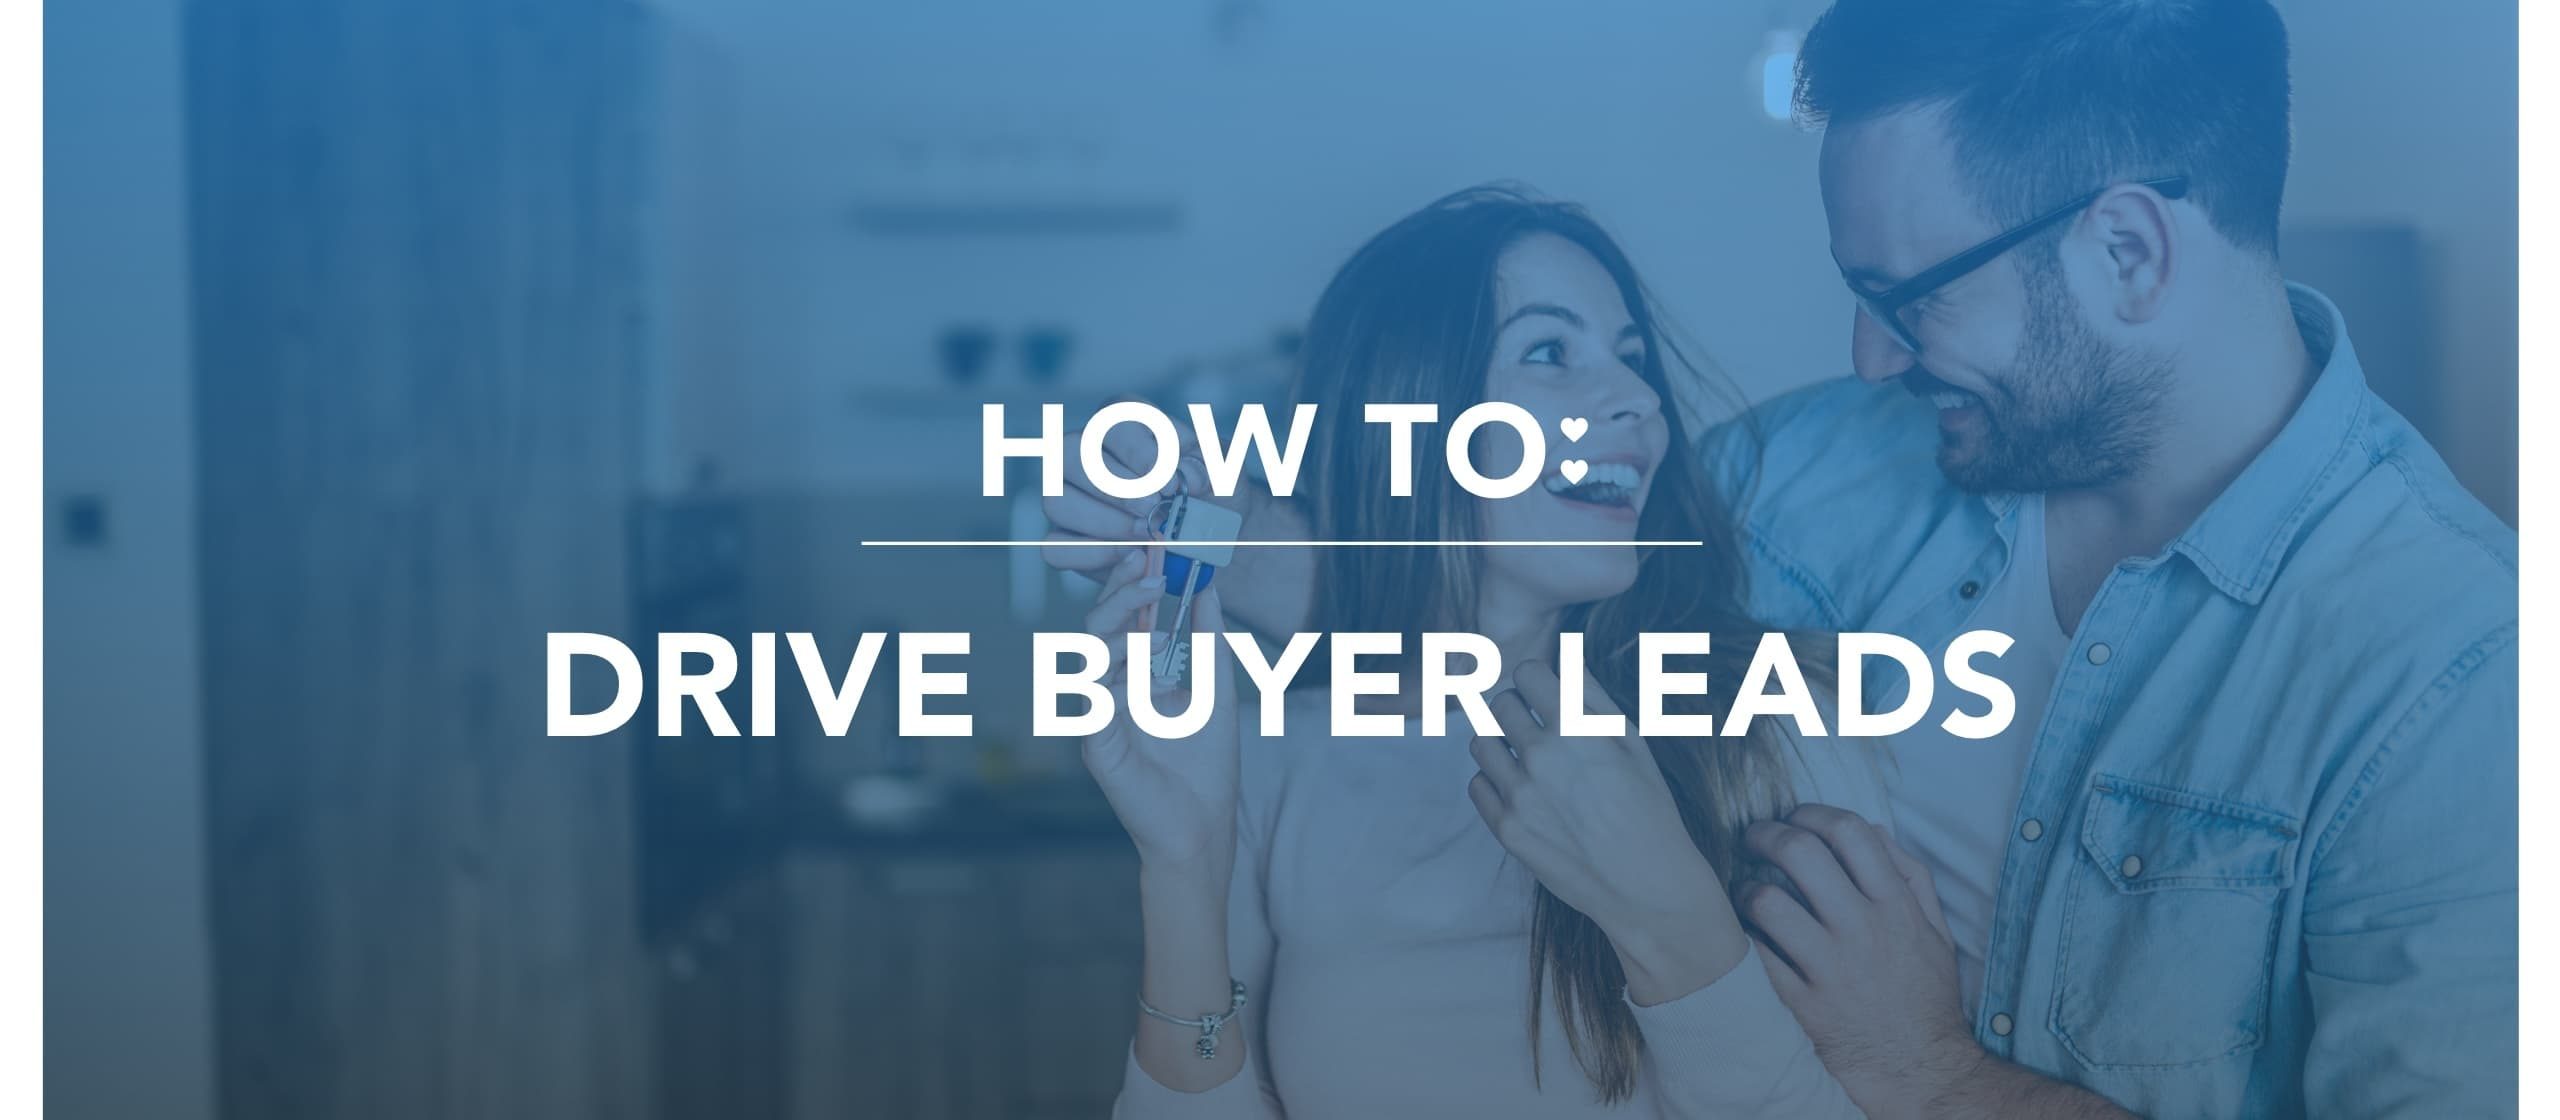 How to Drive Buyer Leads Header